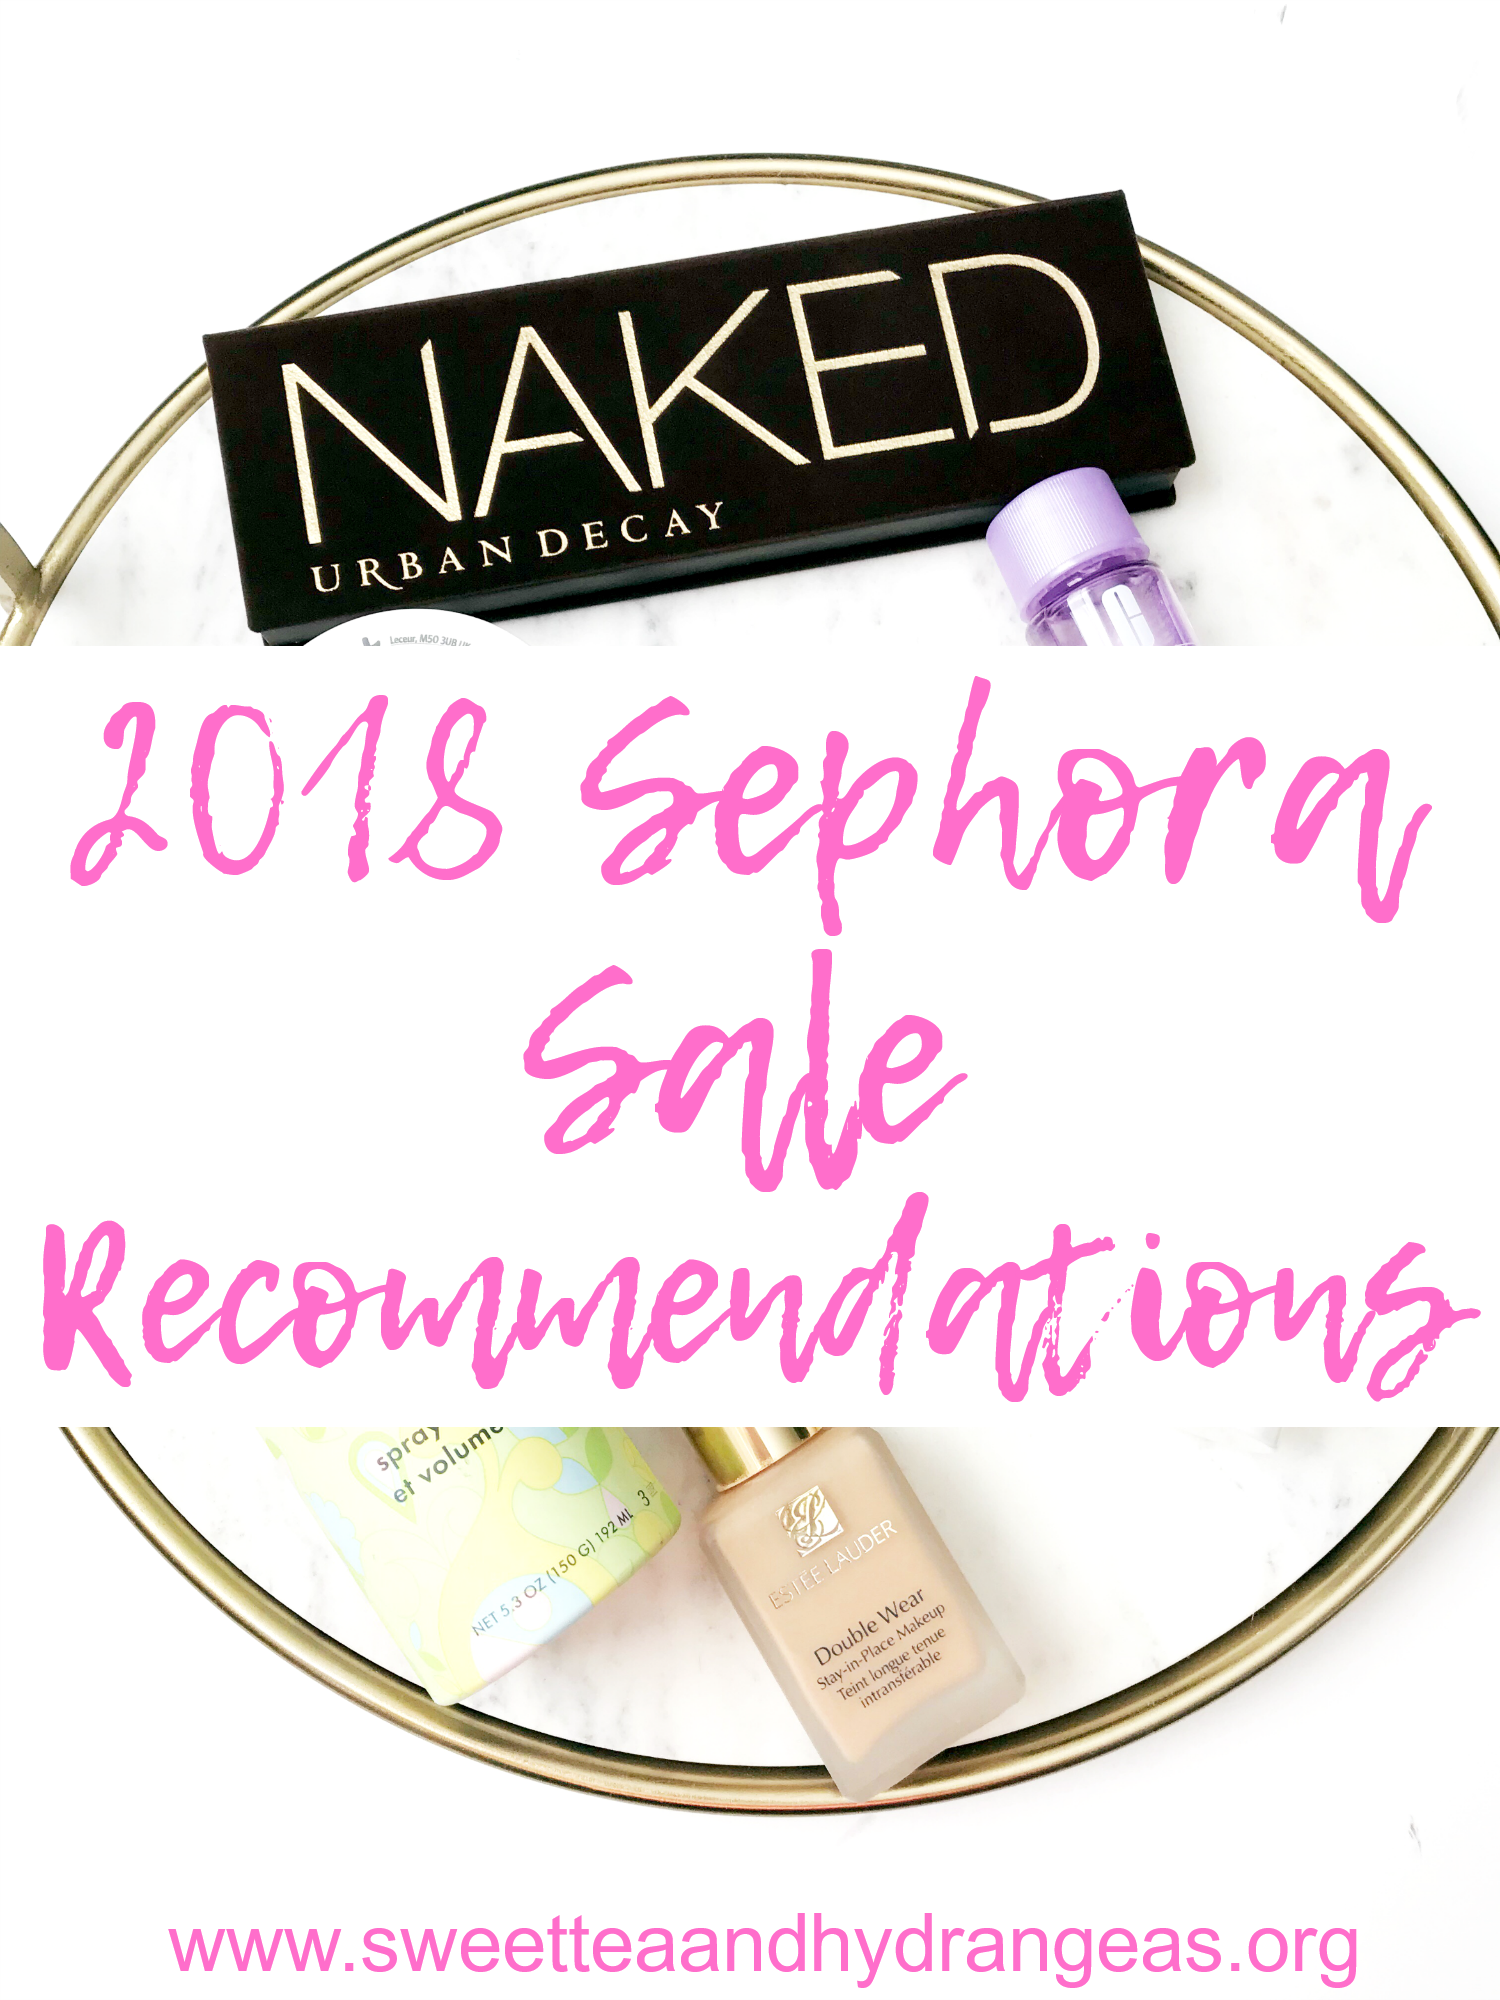 STH 2018 Sephora Sale Recommendations